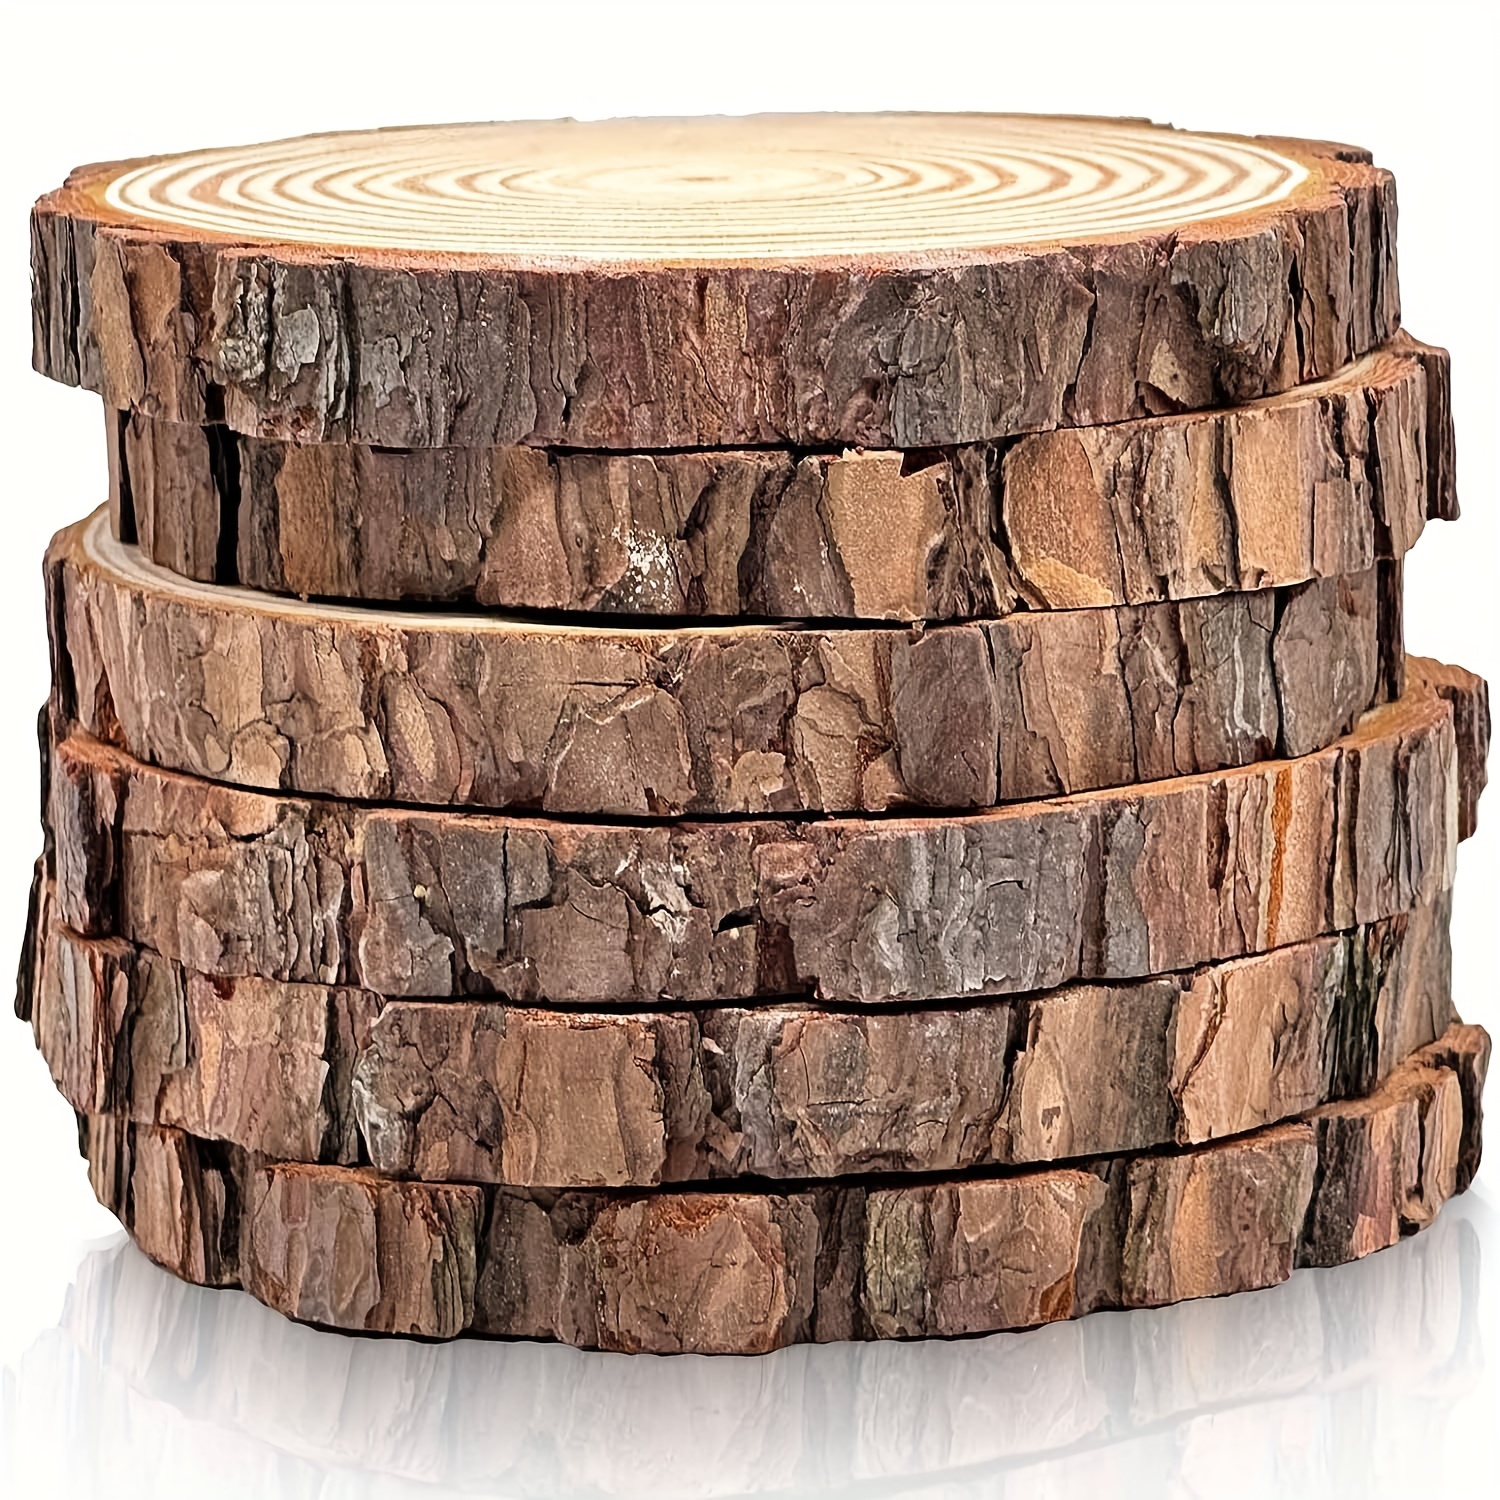 Large Wood Slices 12-13 Inches 6 Pcs Wood Rounds for Centerpieces 12-13  Inch Round Wooden Discs Unfinished Wood Slices for